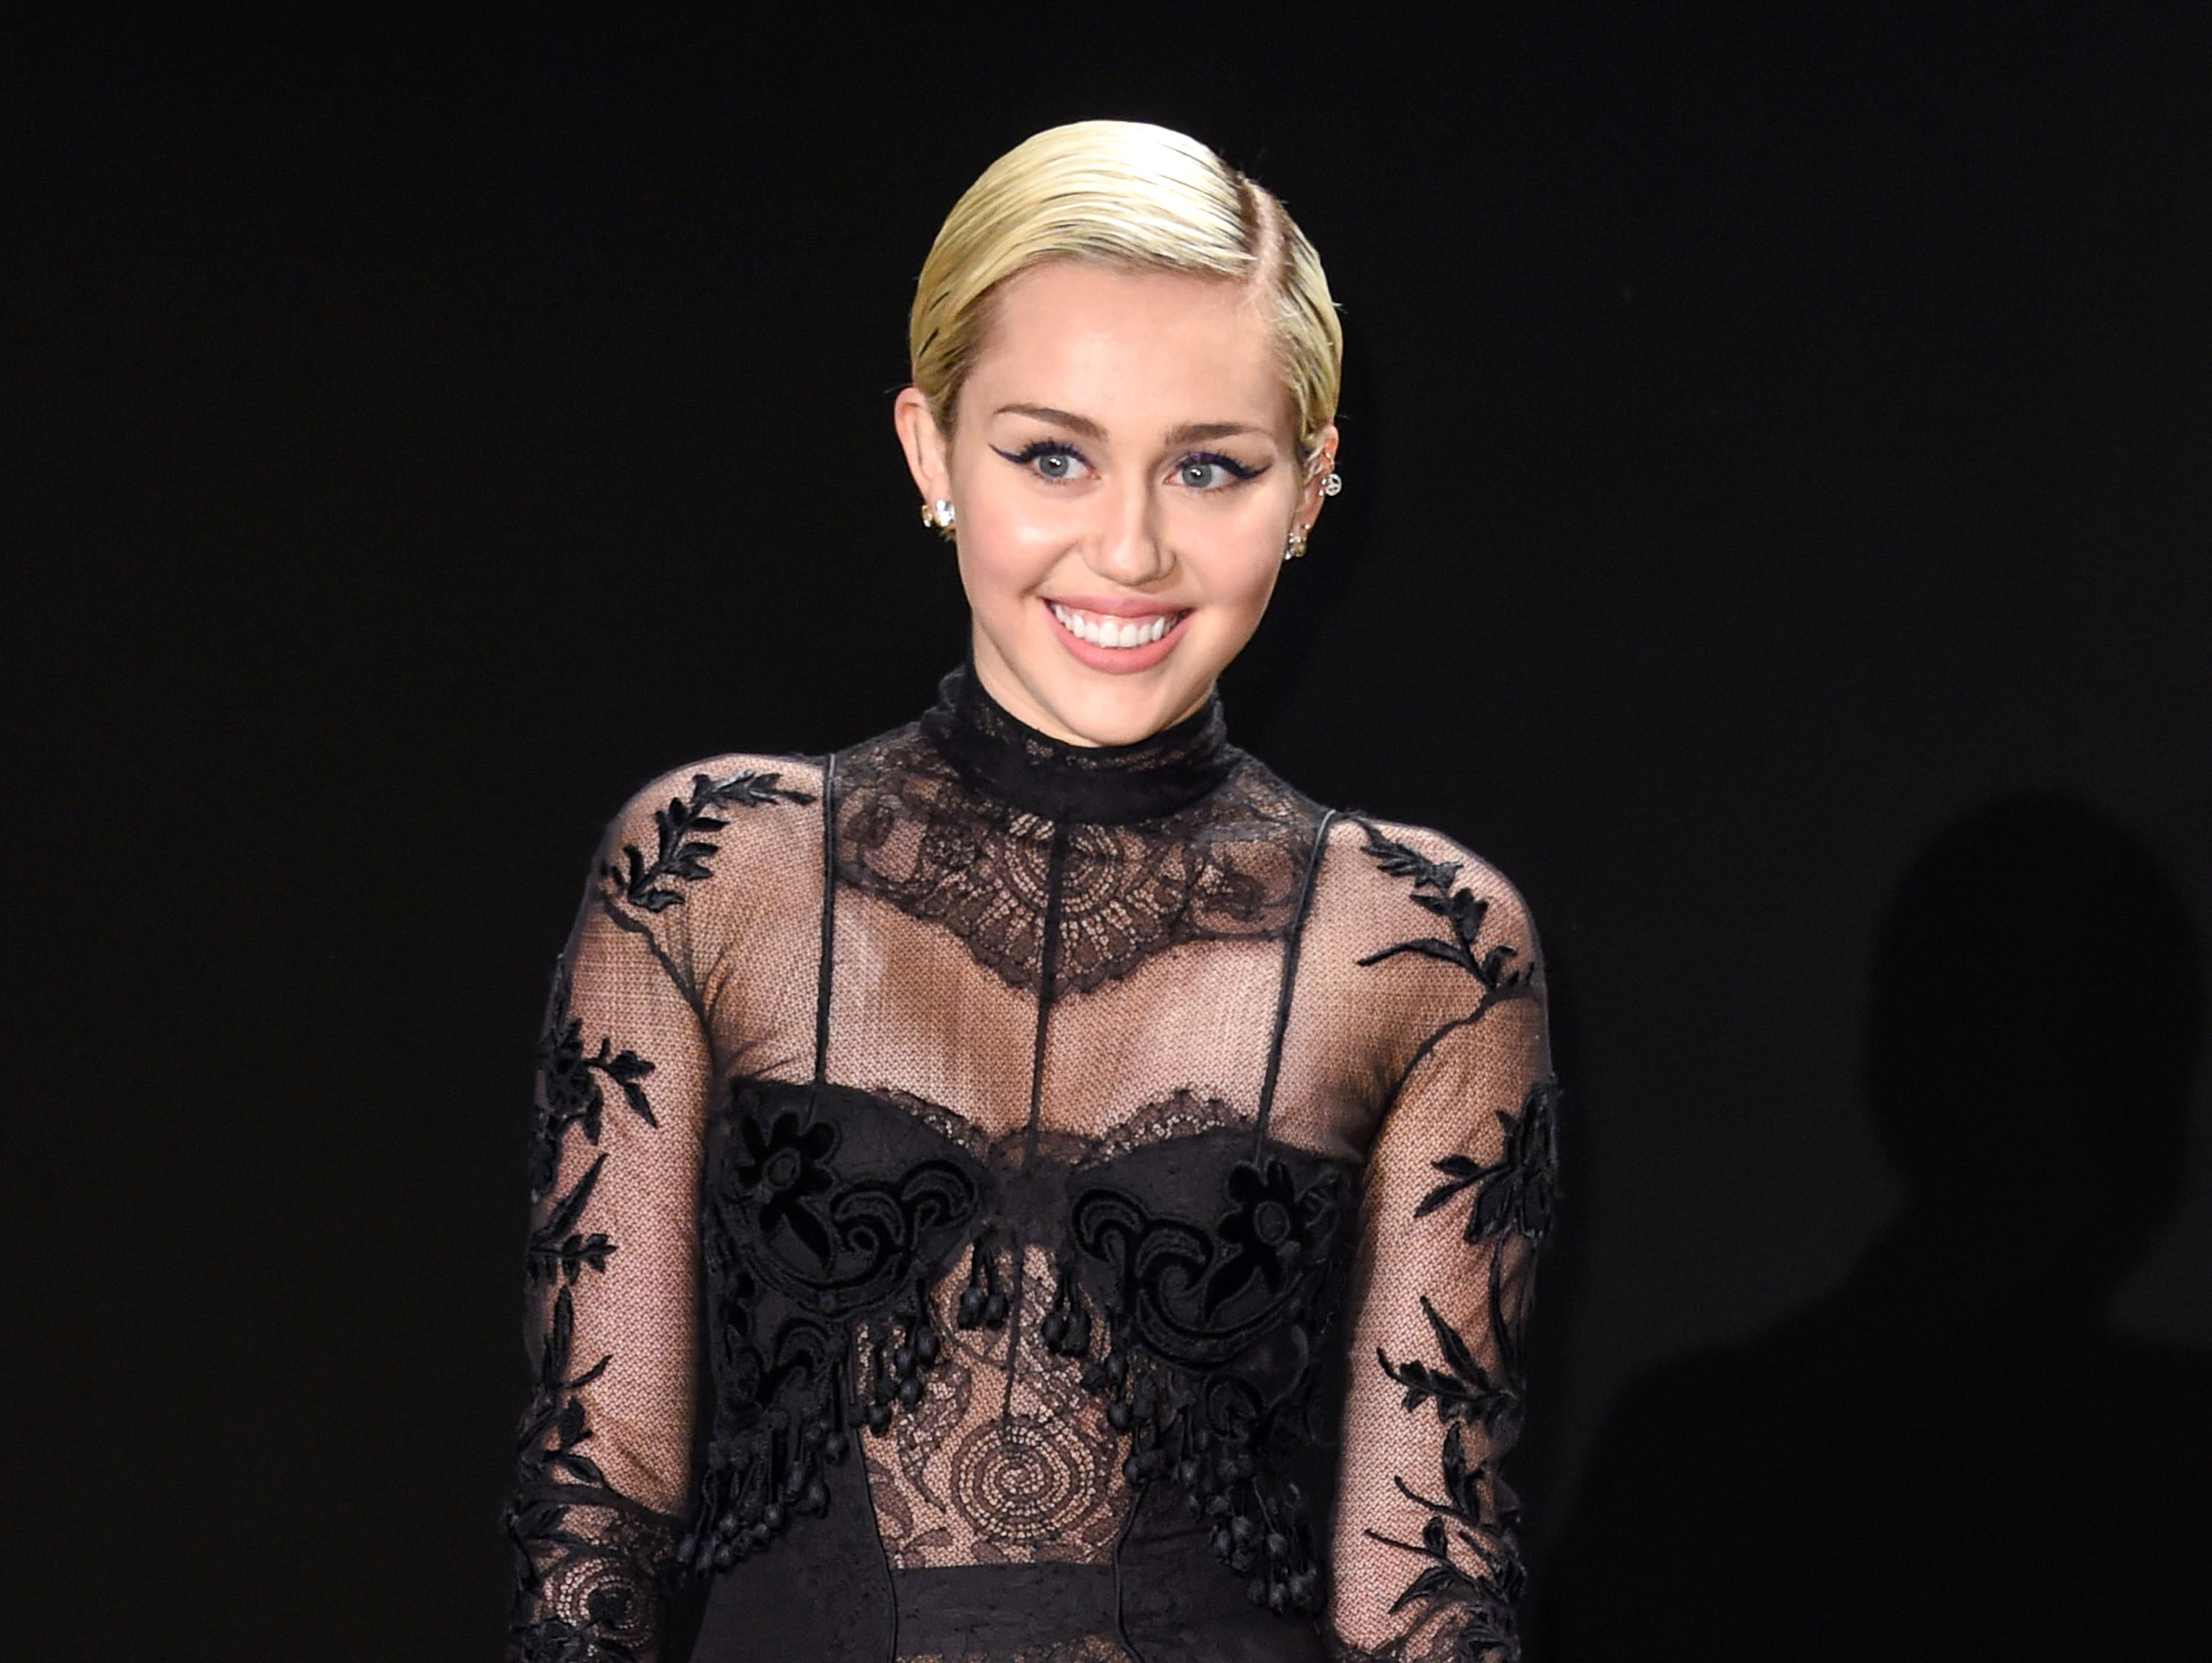 How Miley Cyrus went from joke to activist star